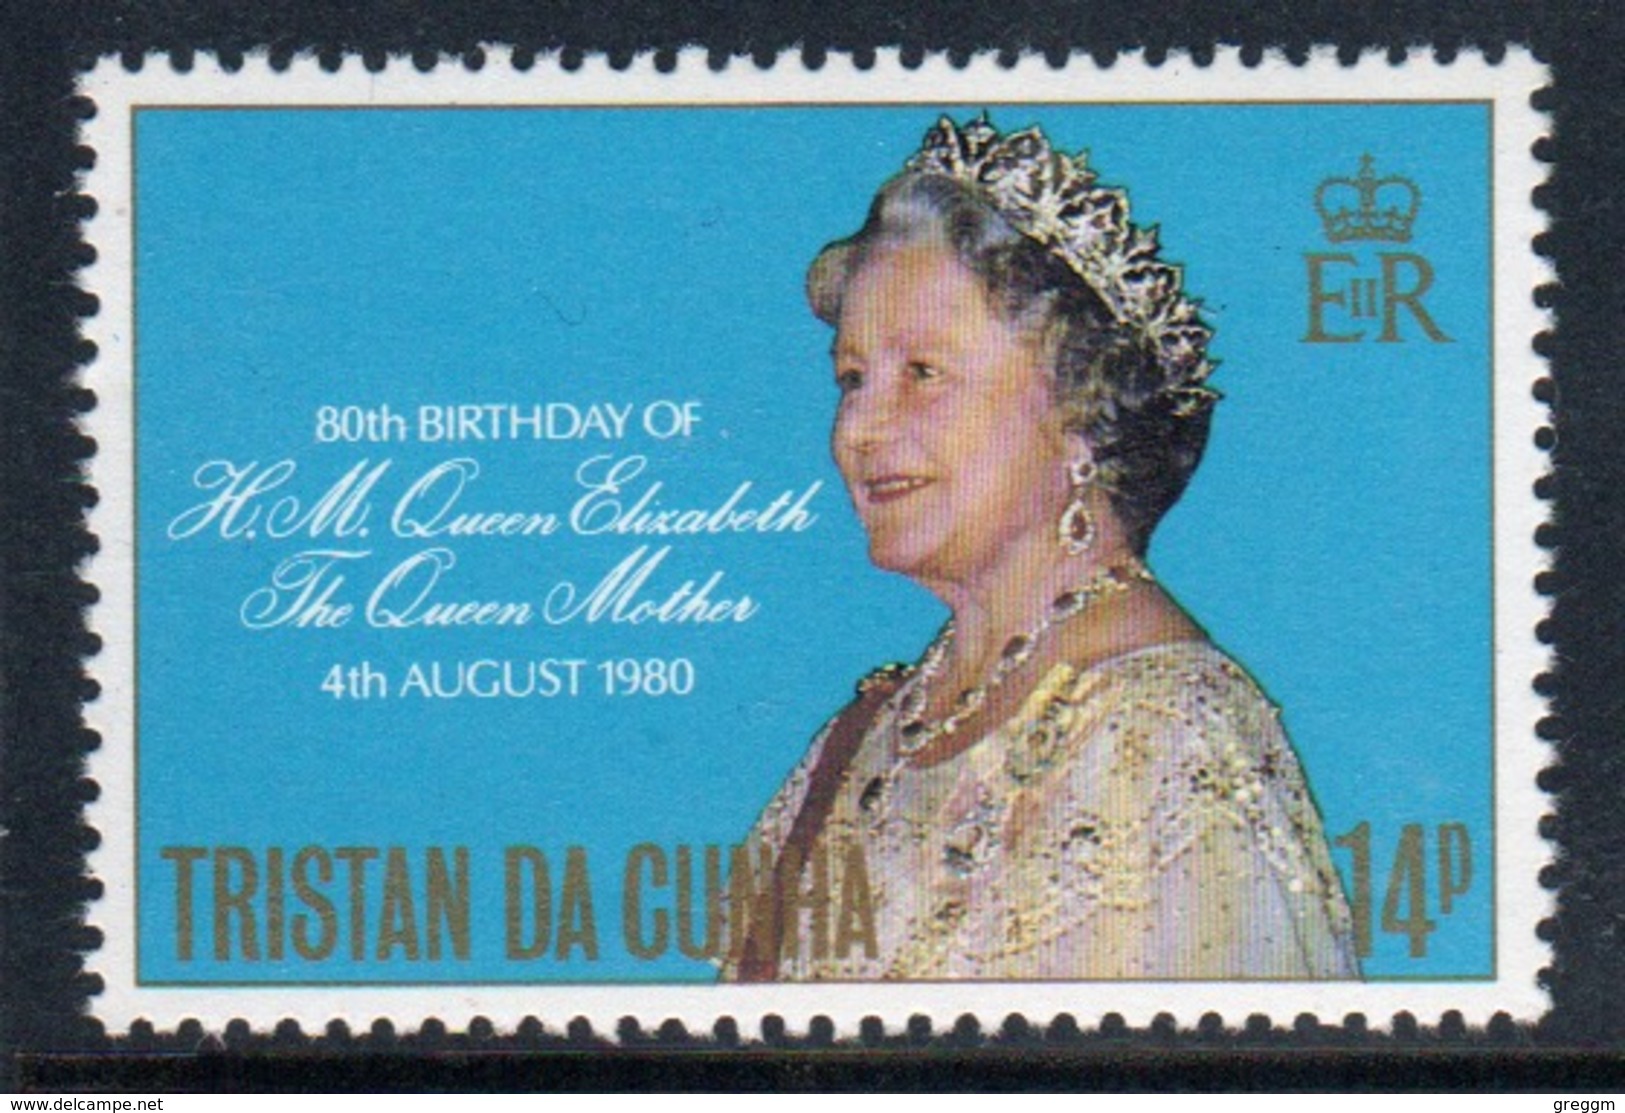 Tristan Da Cunha 1980 Complete Set Of Stamps Commemorating The 80th Birthday Of The Queen Mother. - Tristan Da Cunha